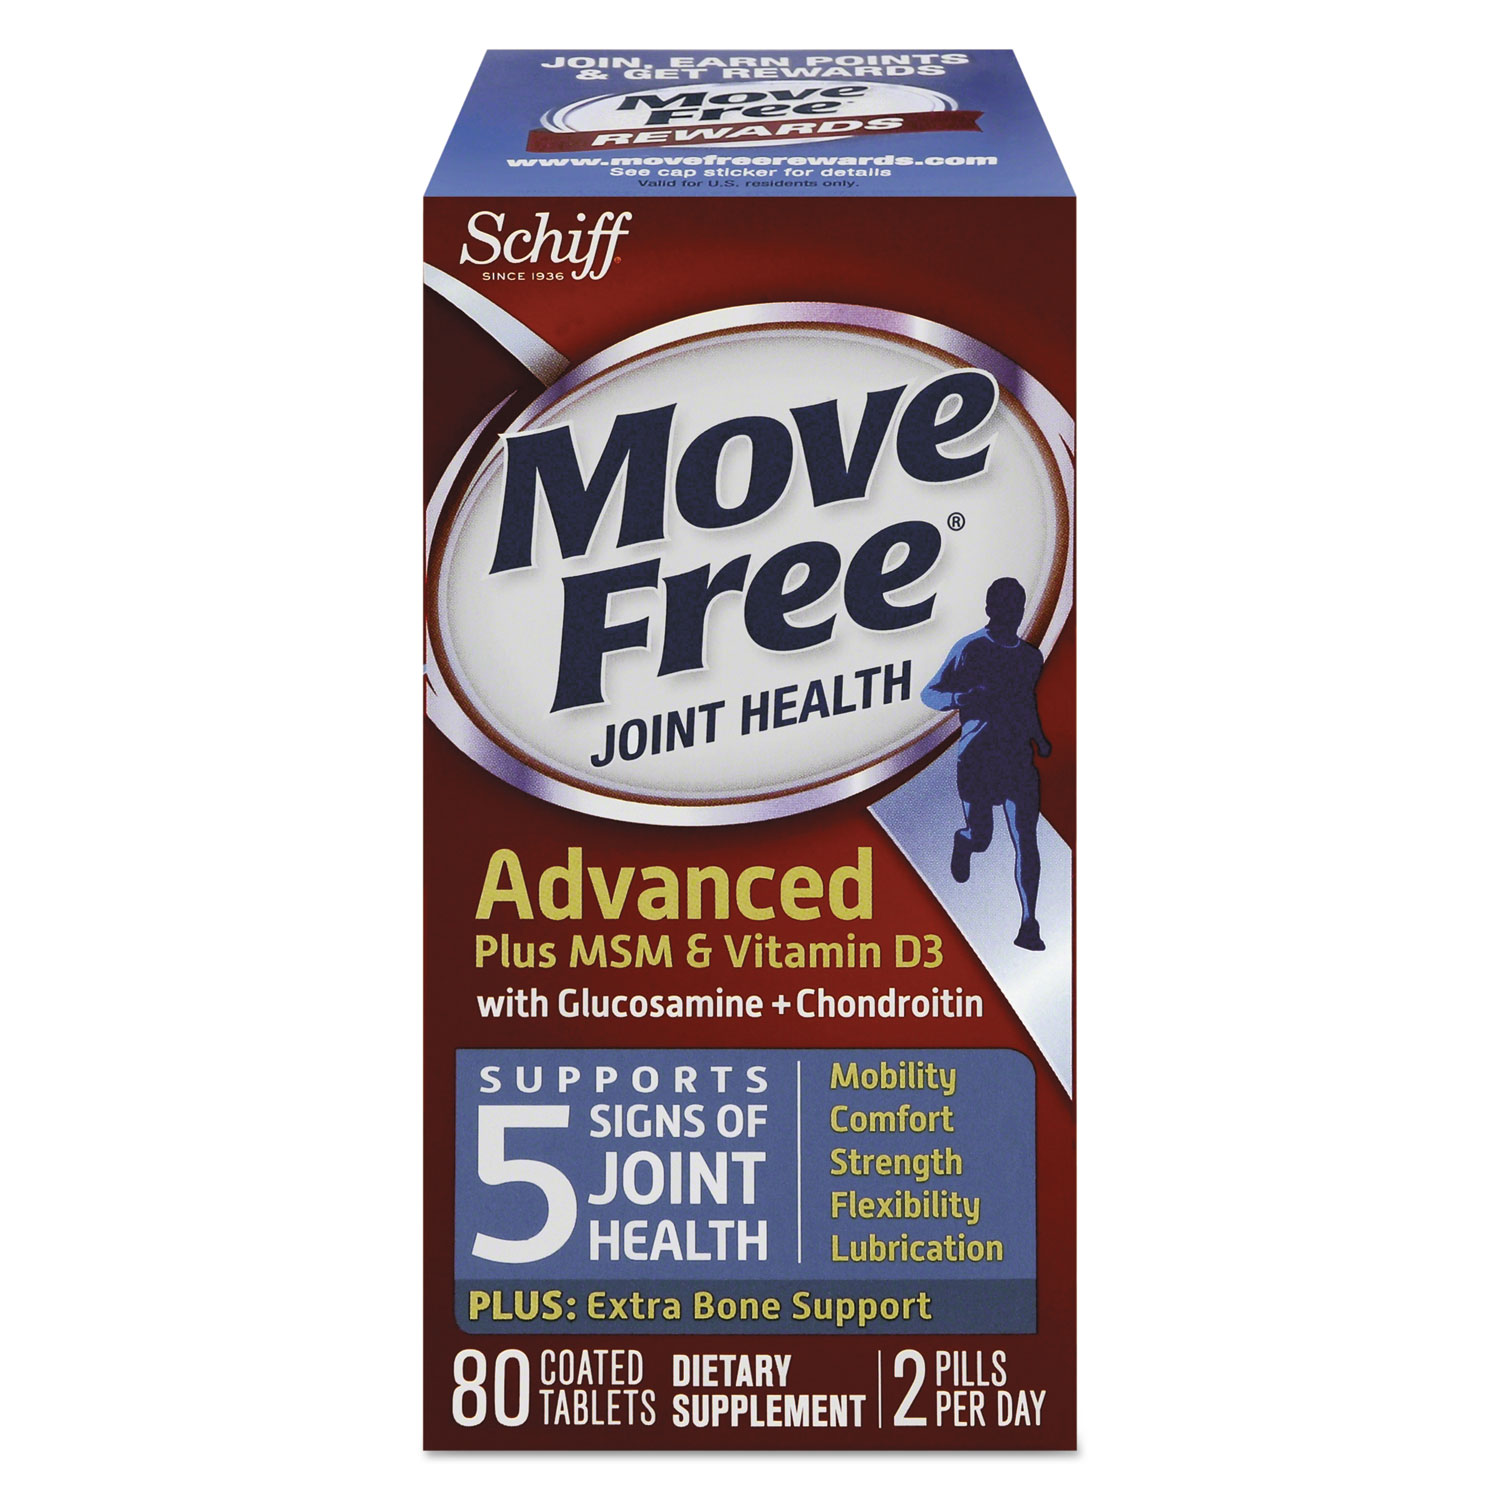  Move Free 20525-97007 Move Free Advanced Plus MSM & Vitamin D3 Joint Health Tablet, 80 Count (MOV97007) 